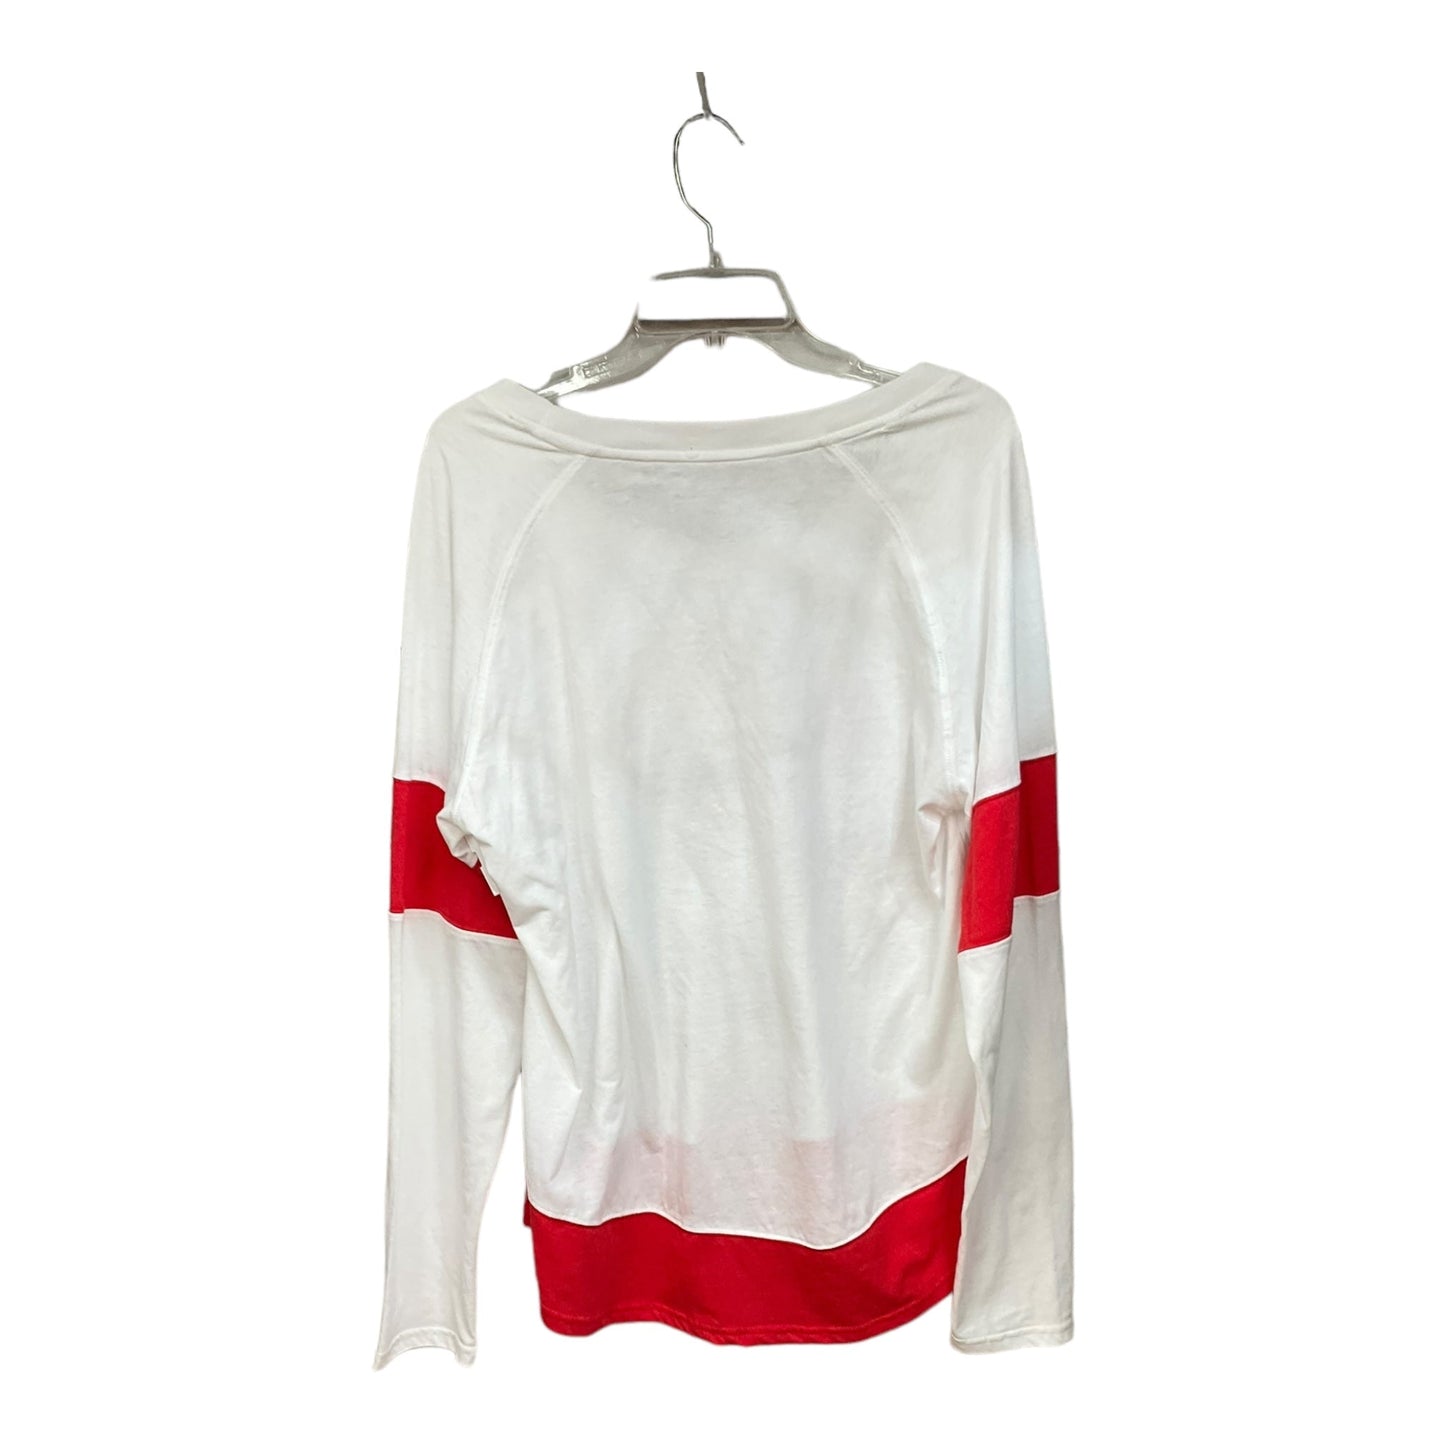 Red & White Athletic Top Long Sleeve Crewneck Clothes Mentor, Size Xxl